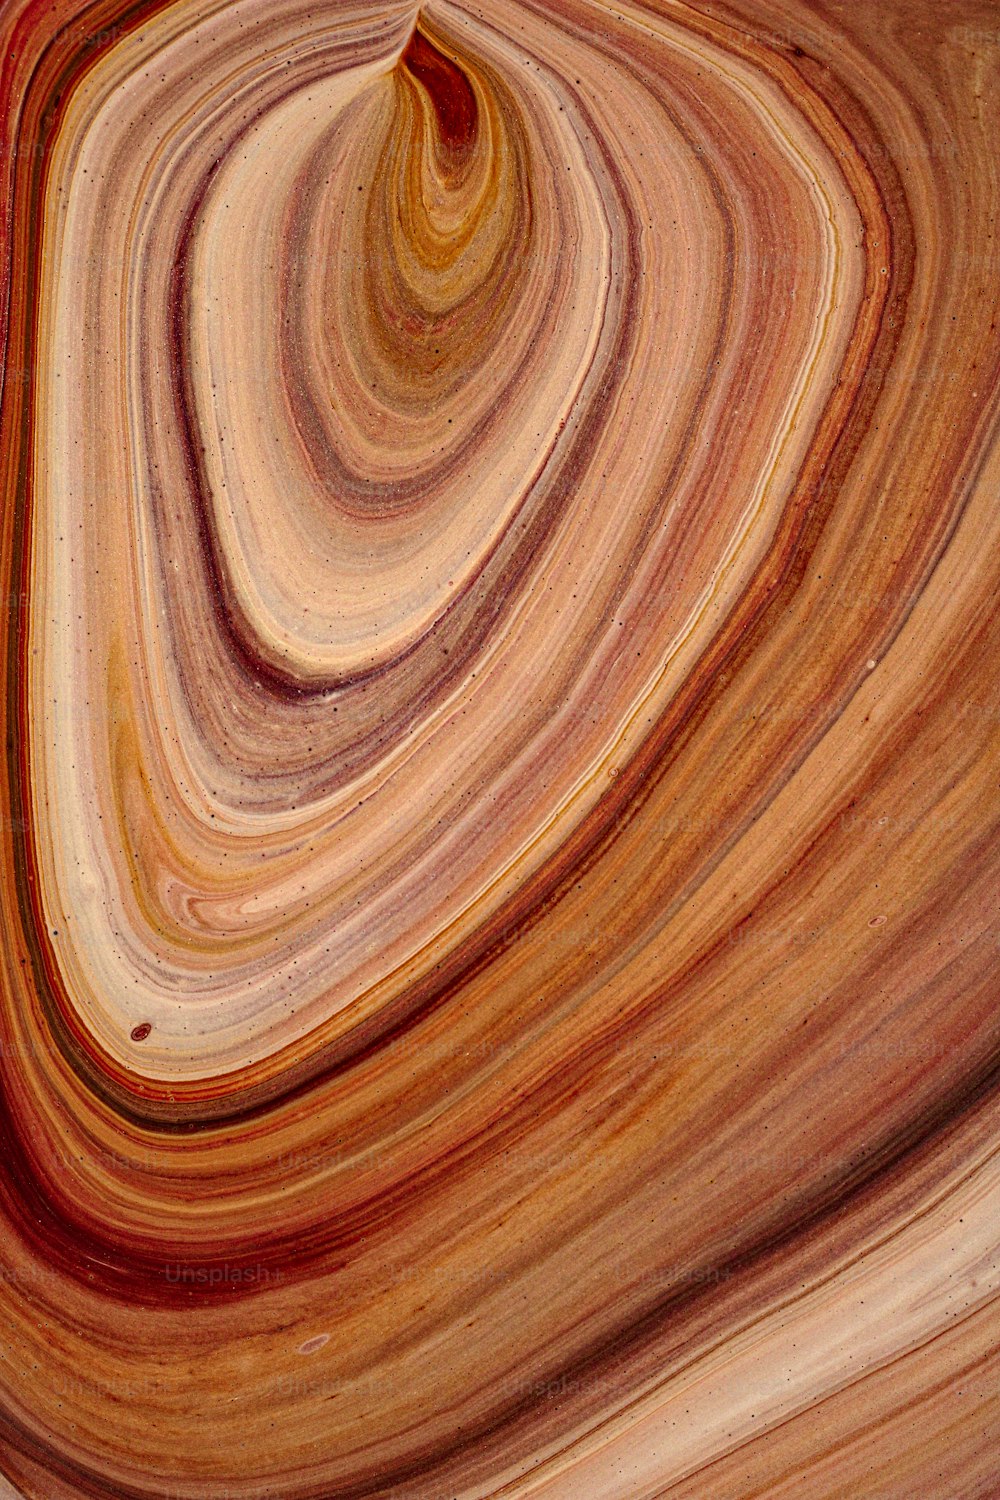 a close up view of a swirl in a marbled surface